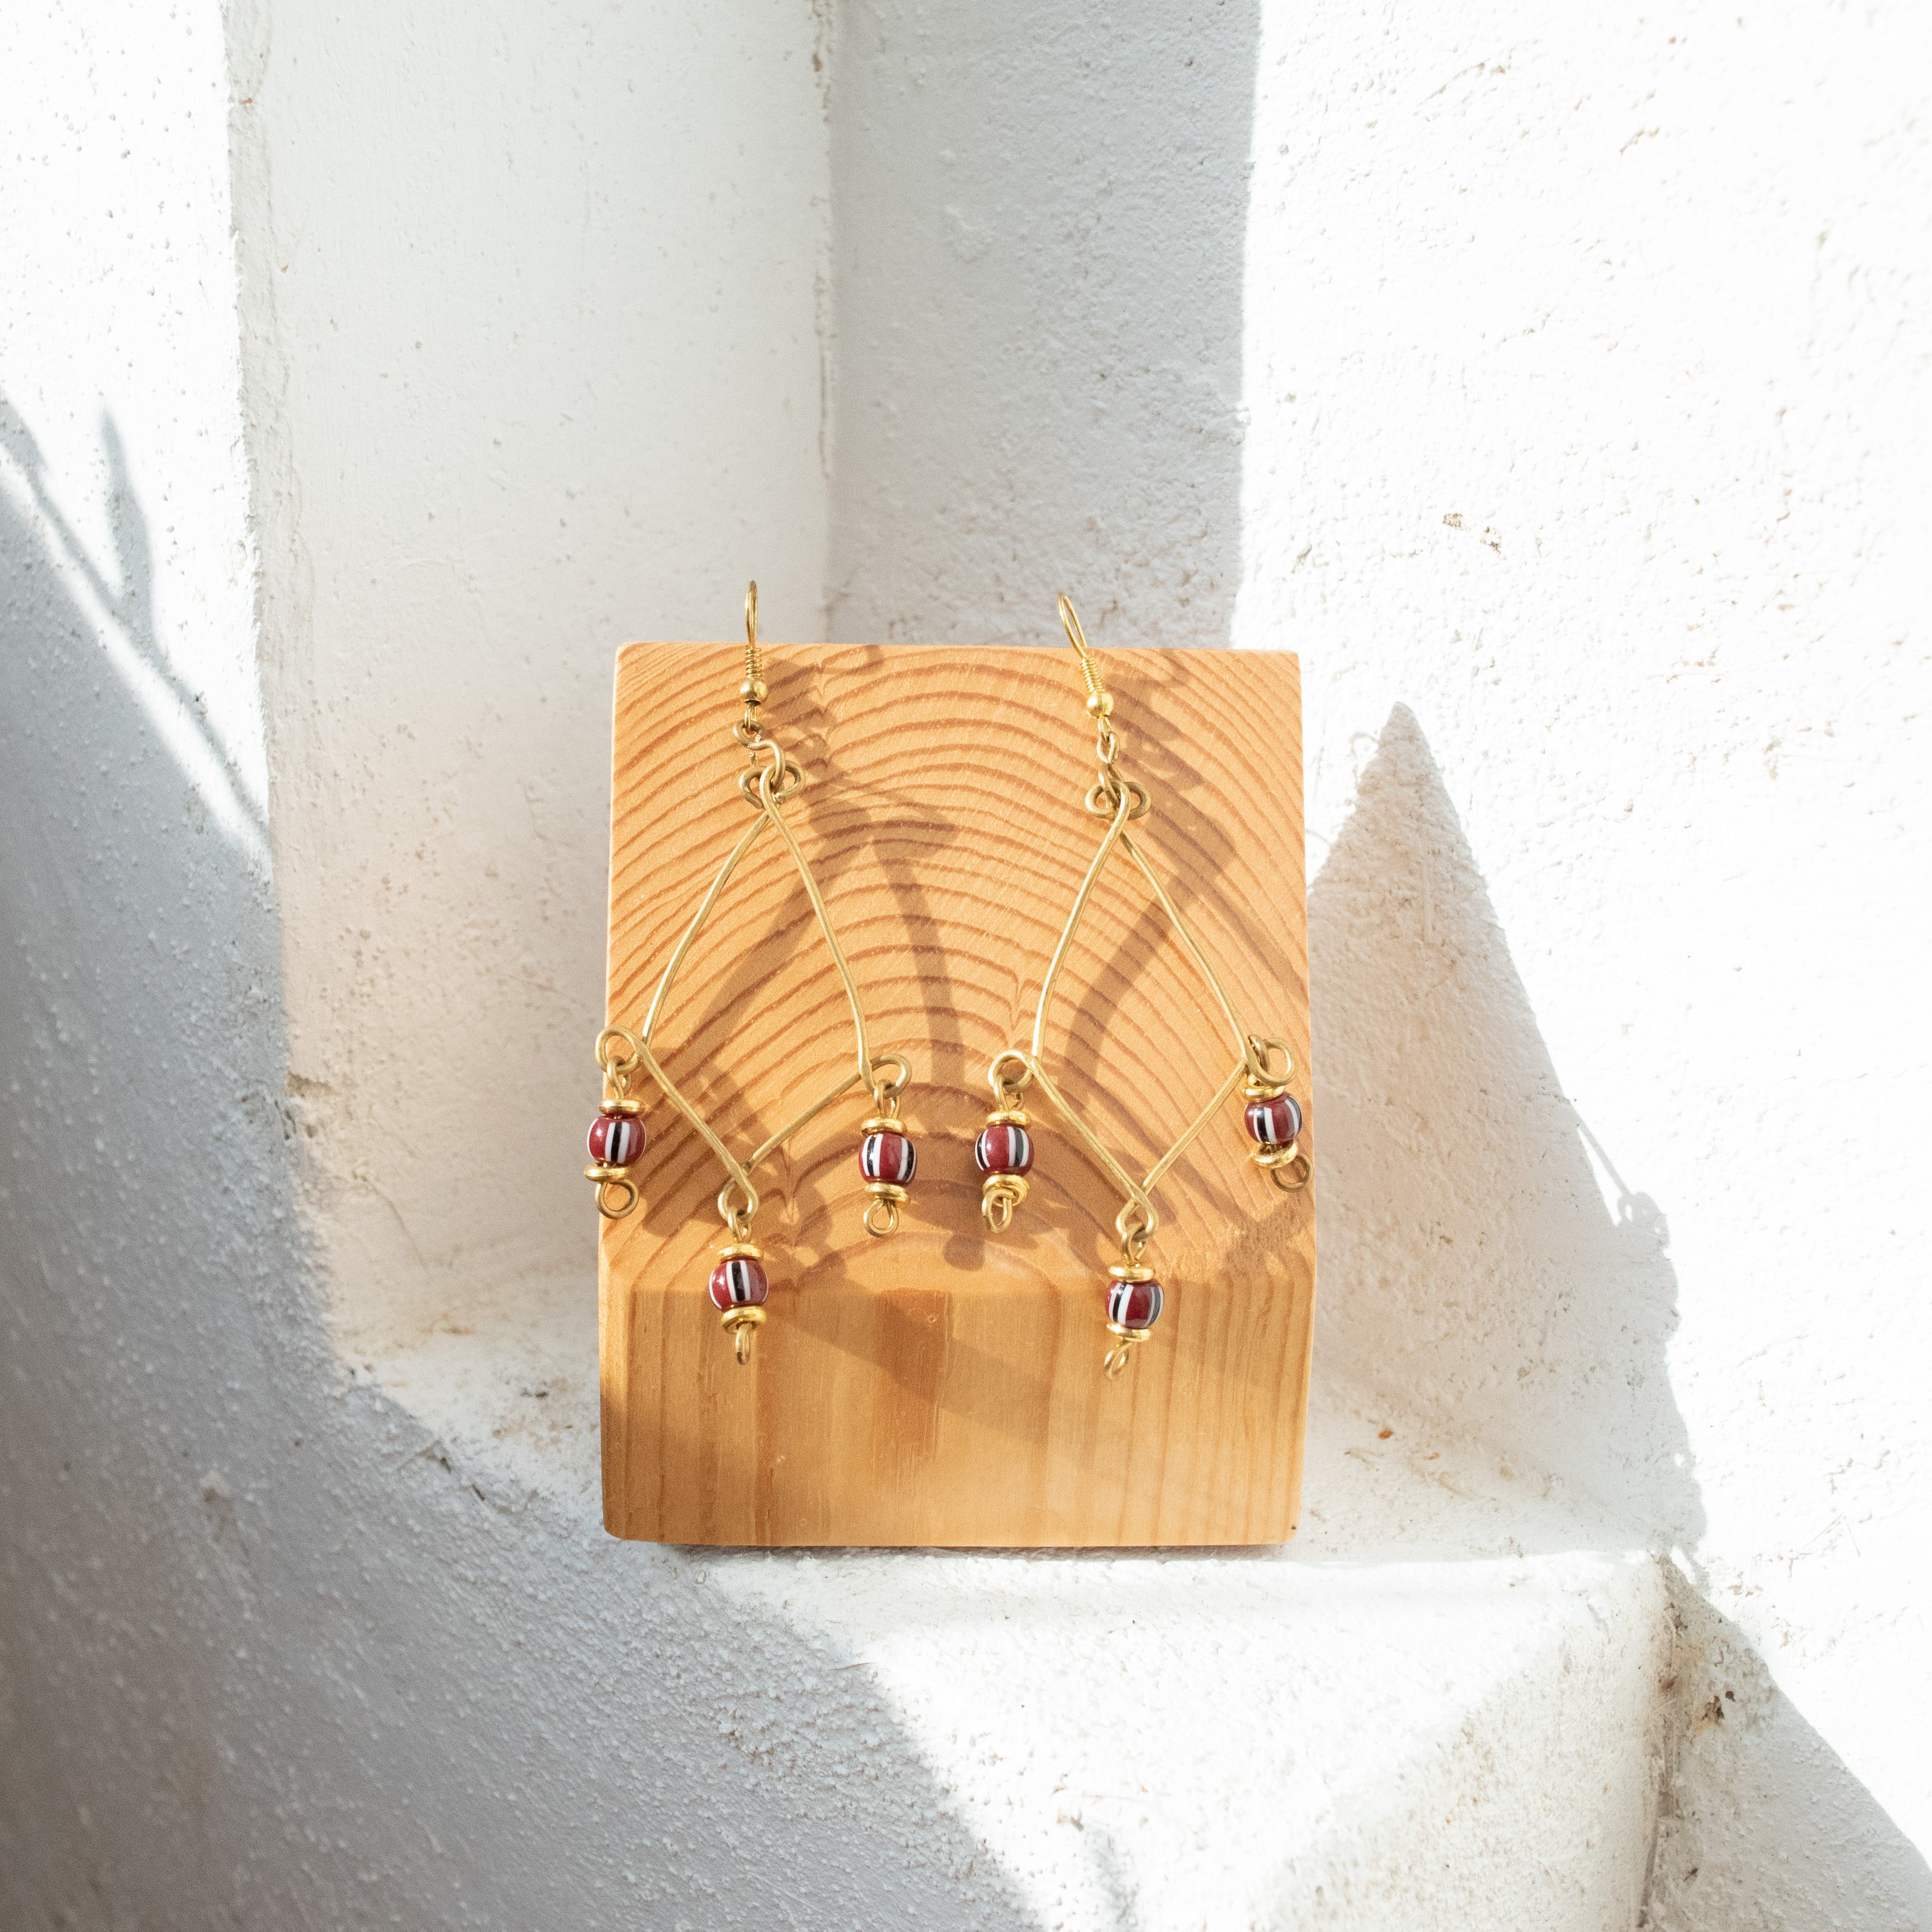 Wire Chandelier Earrings - Kenyan materials and design for a fair trade boutique